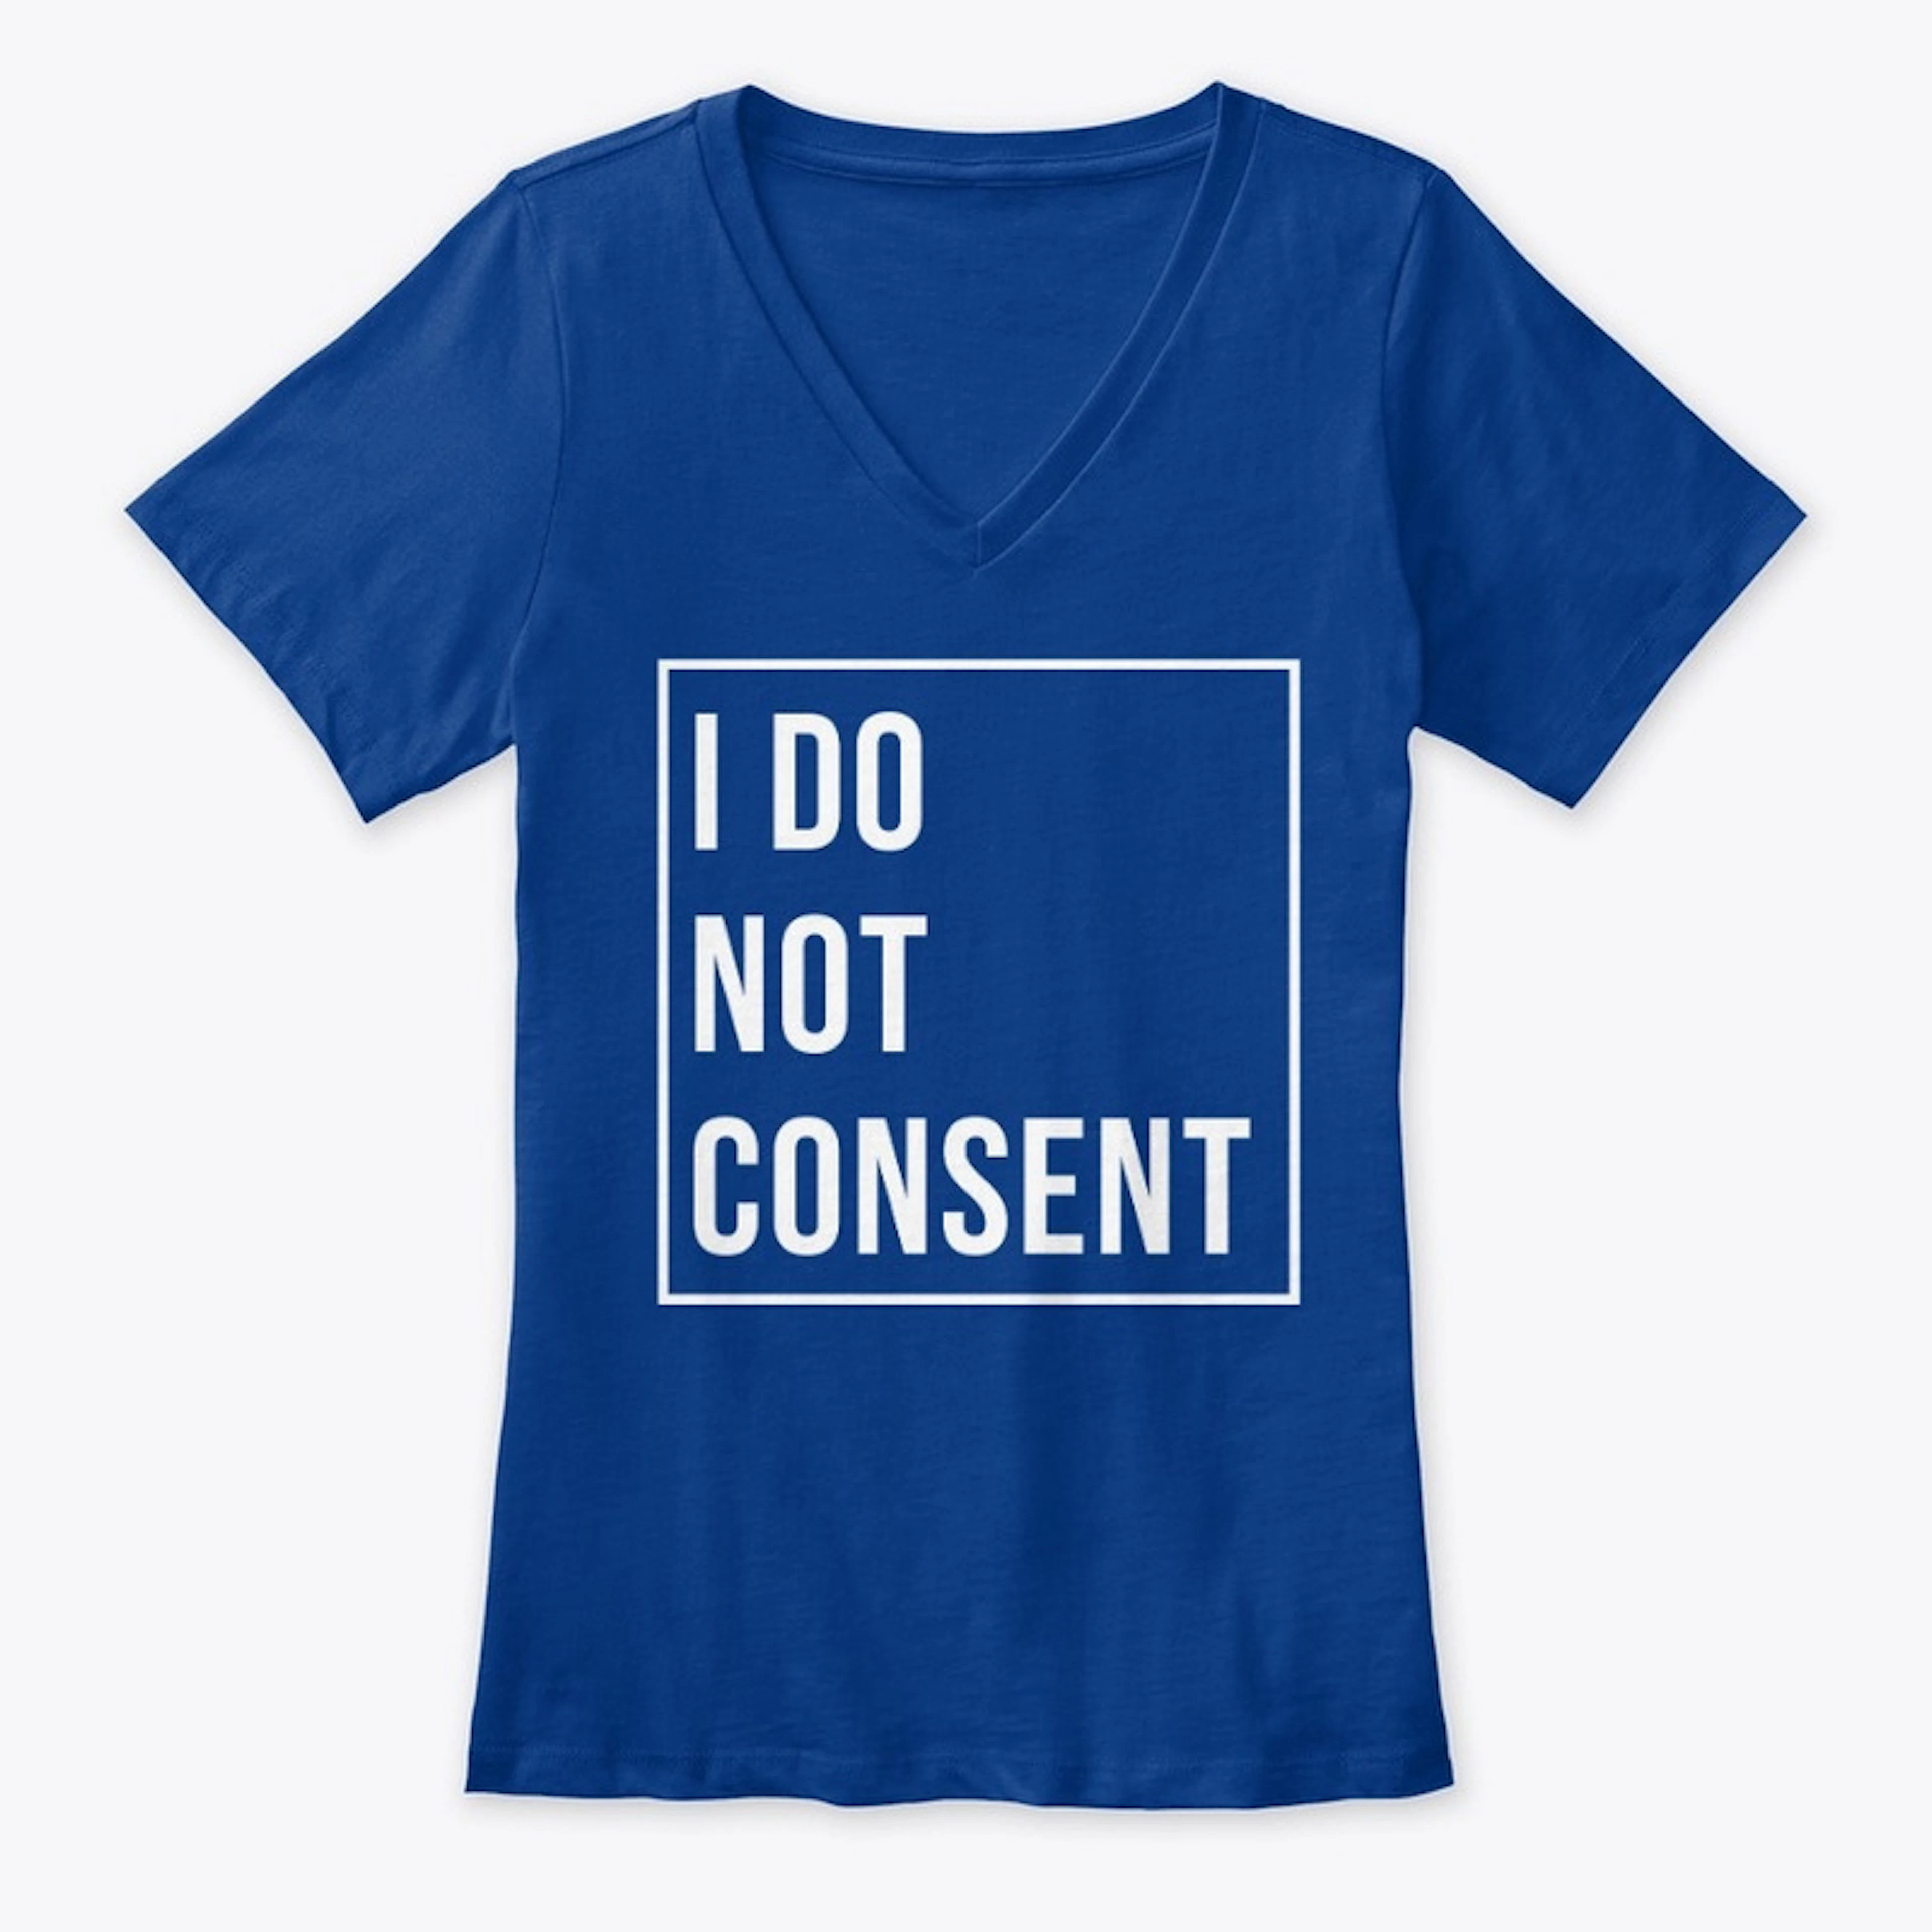 "I DO NOT CONSENT"